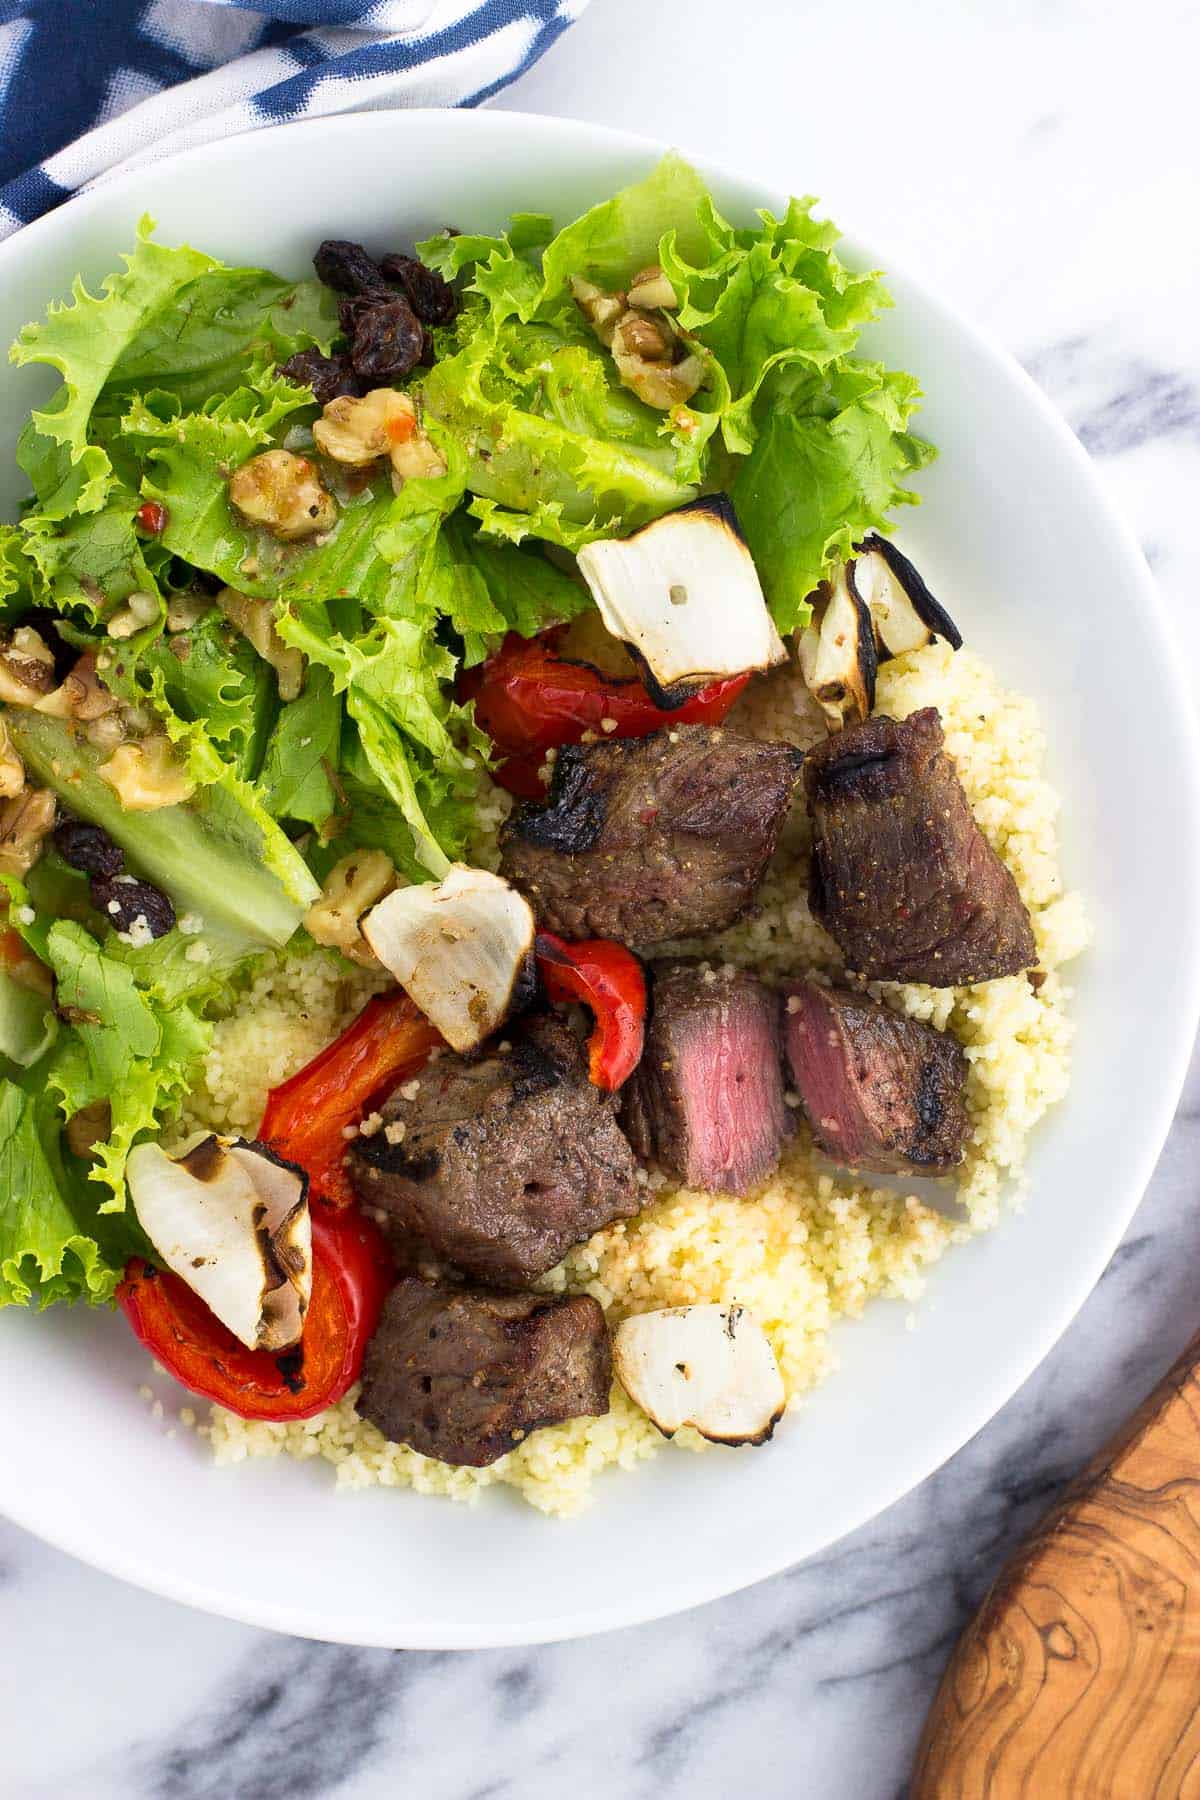 An overhead picture of grilled steak cubes served on couscous with veggies and a side salad, with one of the pieces of steak cut in half